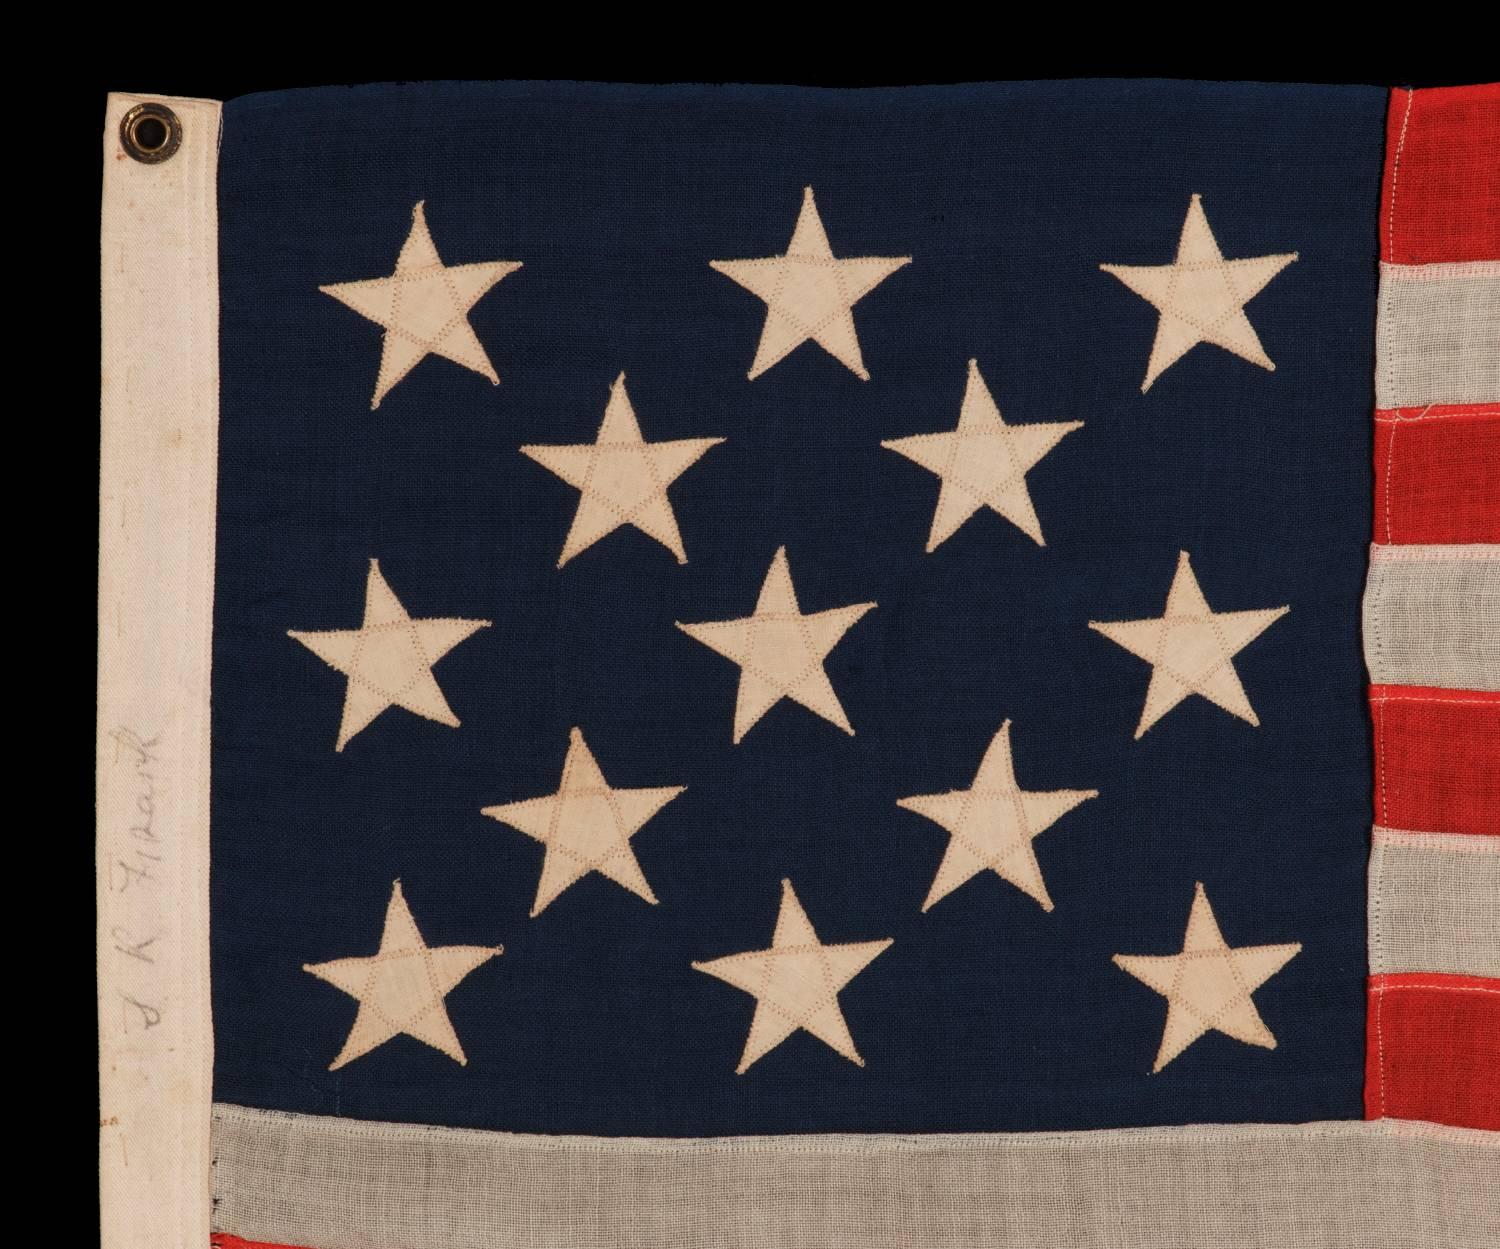 when was the first united states flag made